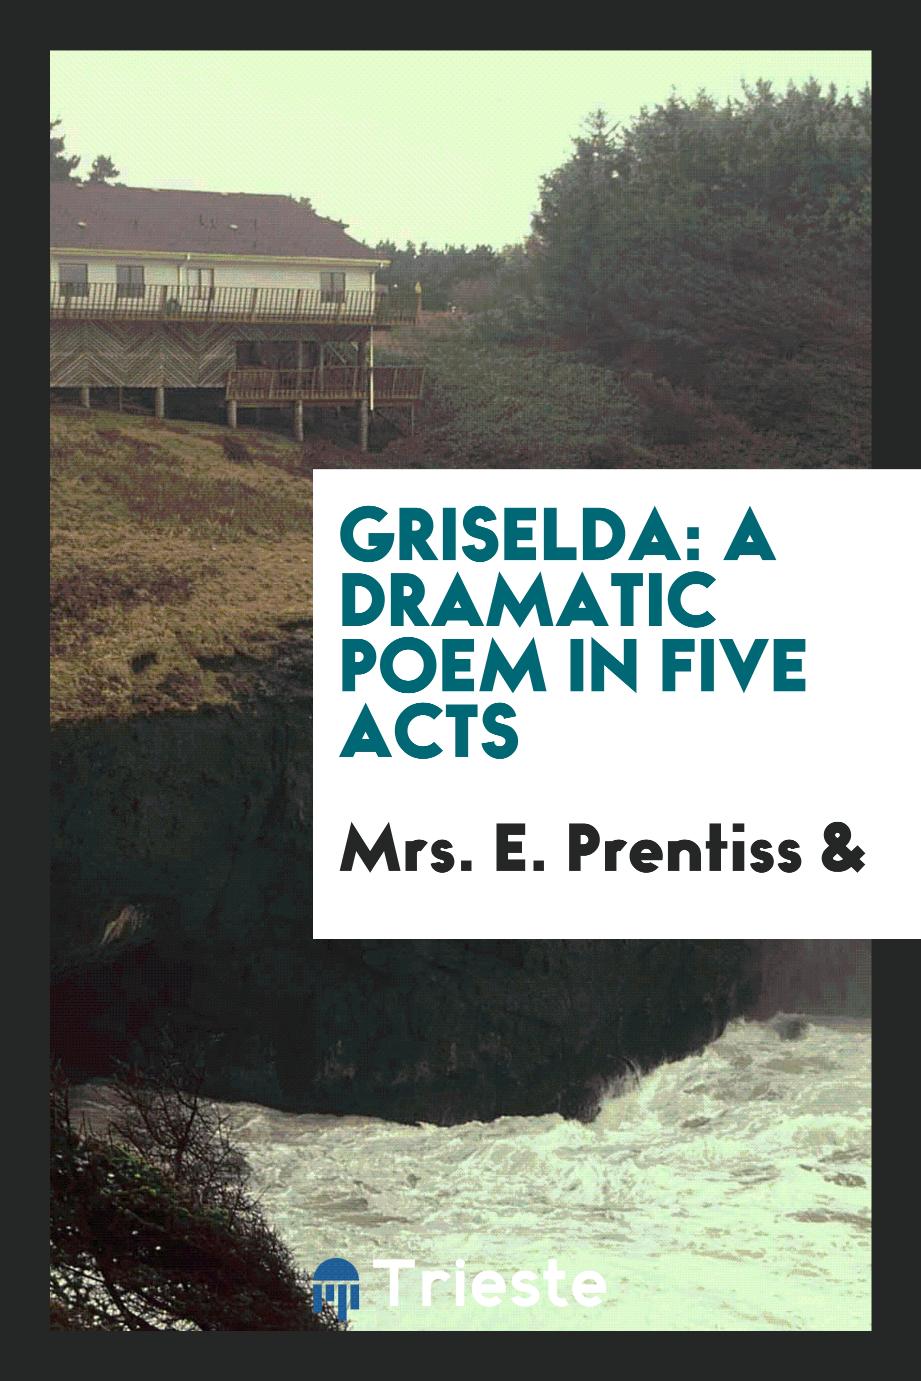 Griselda: A Dramatic Poem in Five Acts